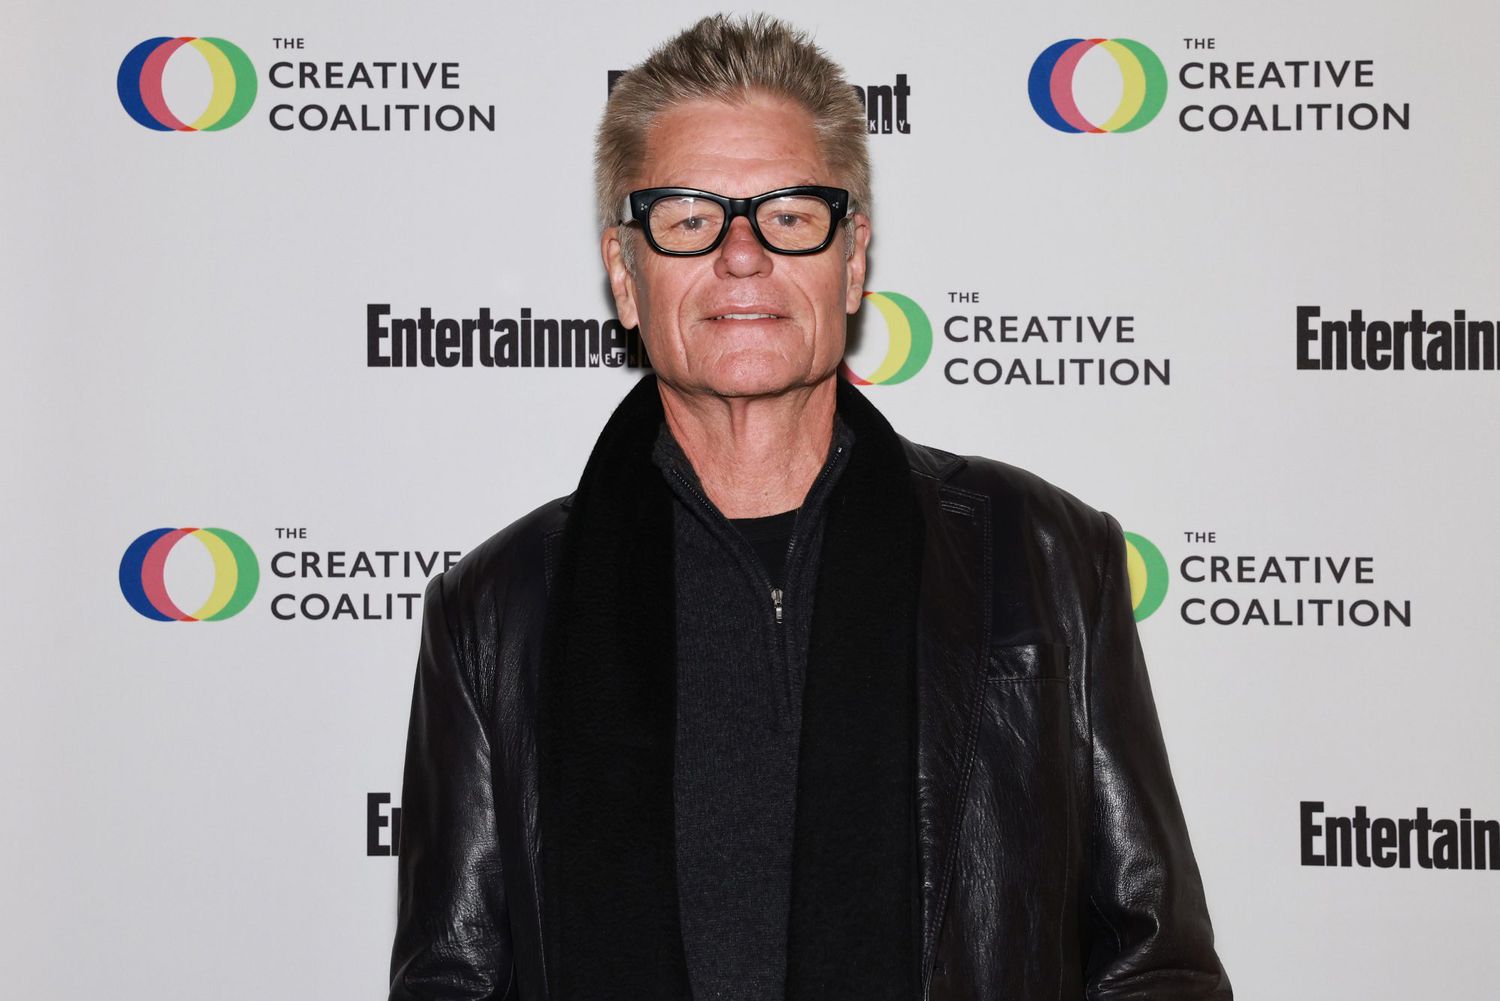 PARK CITY, UTAH - JANUARY 21: Harry Hamlin attends the 2023 Spotlight Initiative Awards Dinner Gala Hosted By Tim Daly Benefiting The Creative Coalition at Buona Vita on January 21, 2023 in Park City, Utah. (Photo by Arturo Holmes/Getty Images)